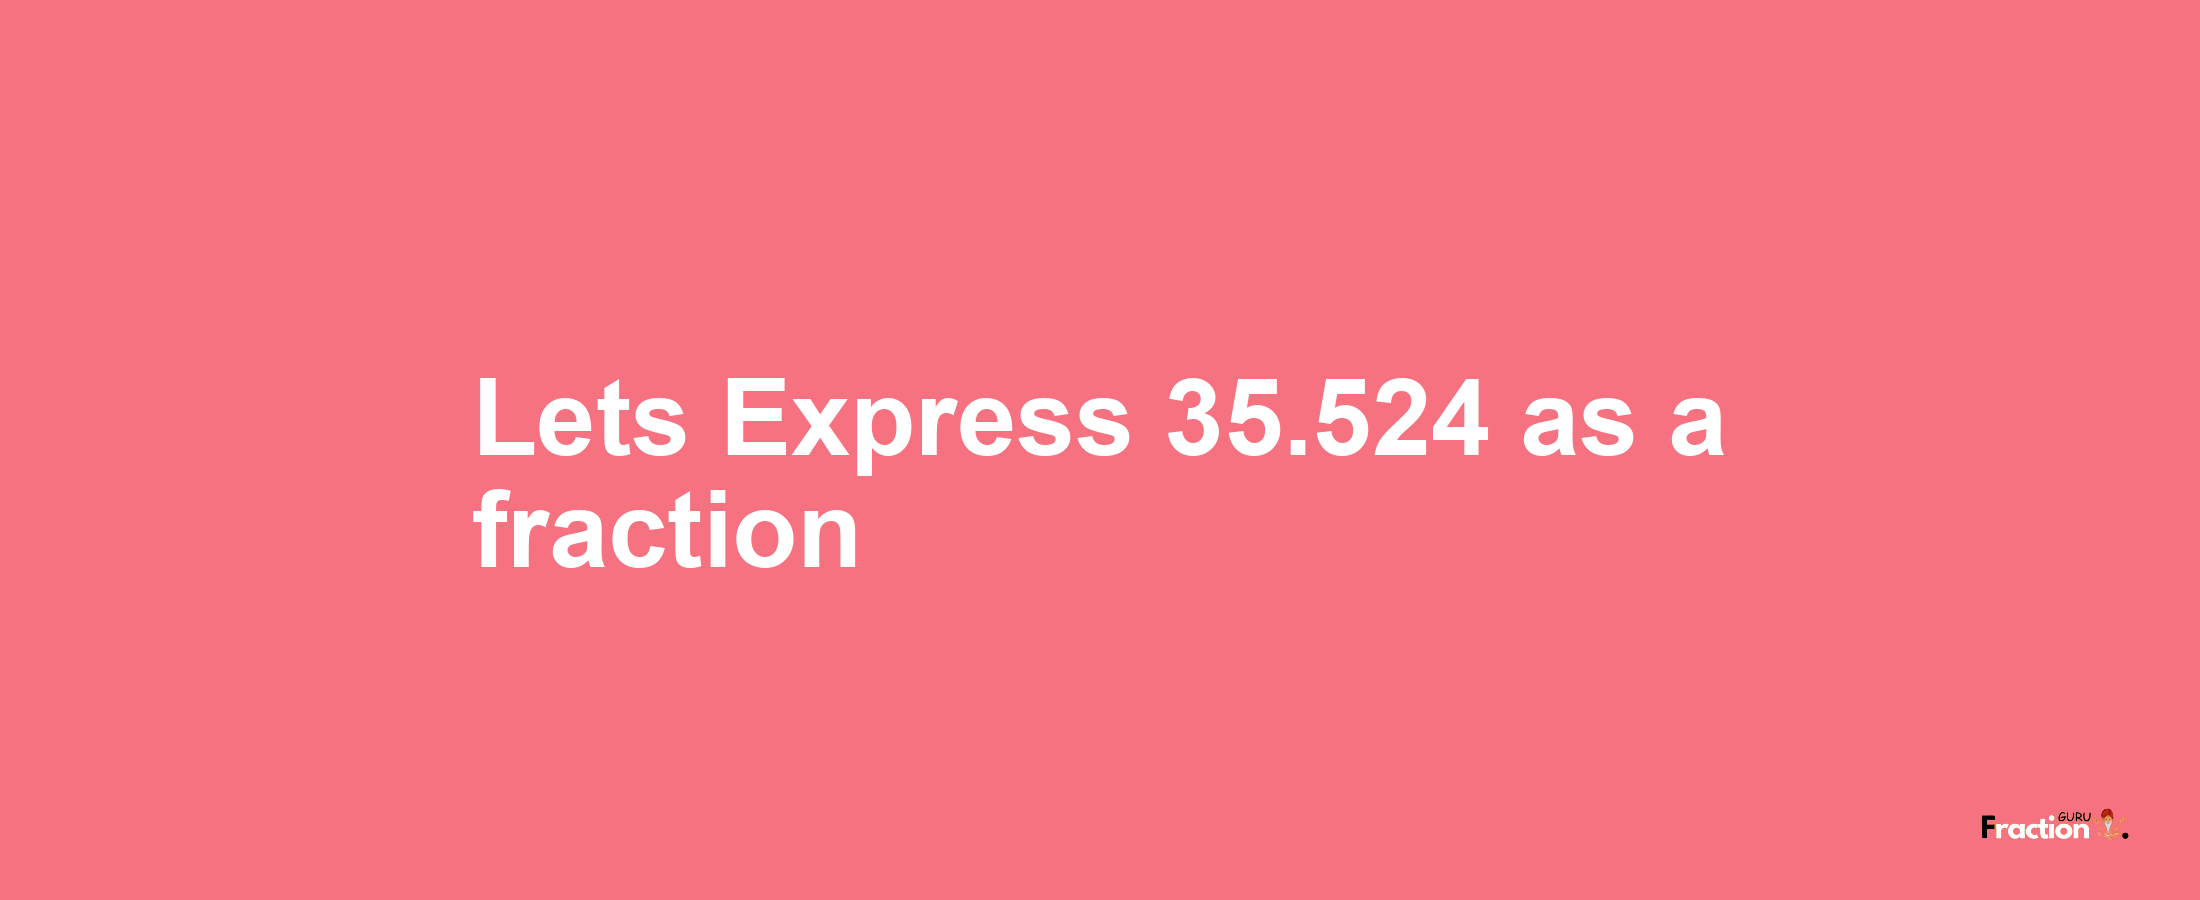 Lets Express 35.524 as afraction